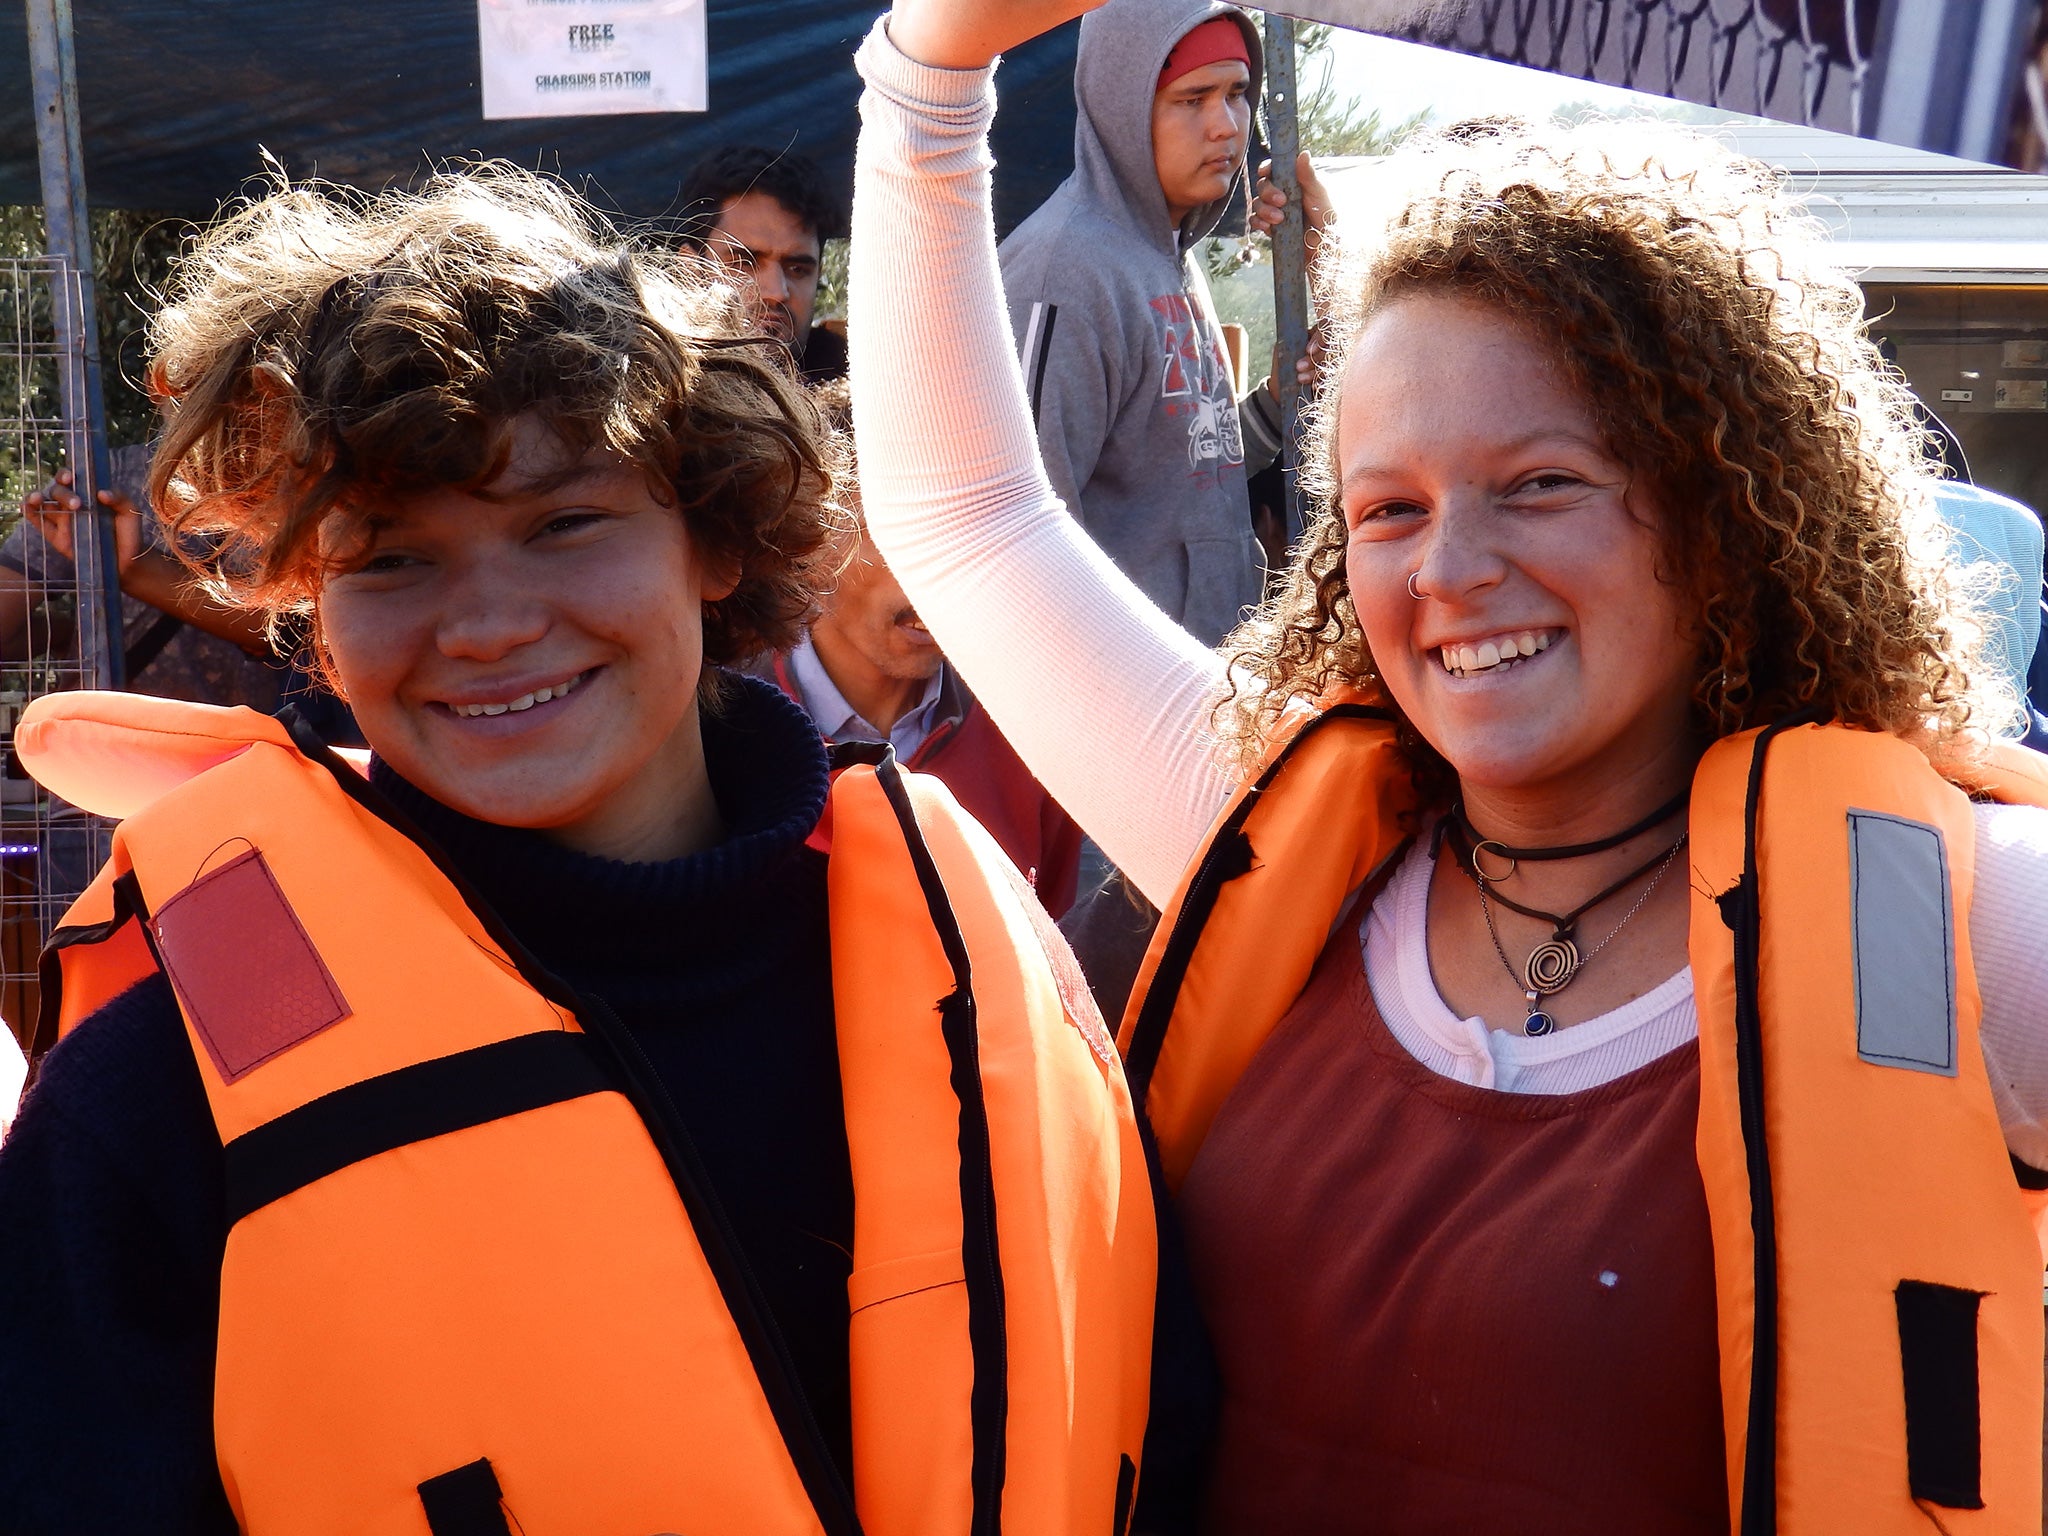 Aid workers Annie Risner, 18, left and Ruby Brookman Prins, 19, right